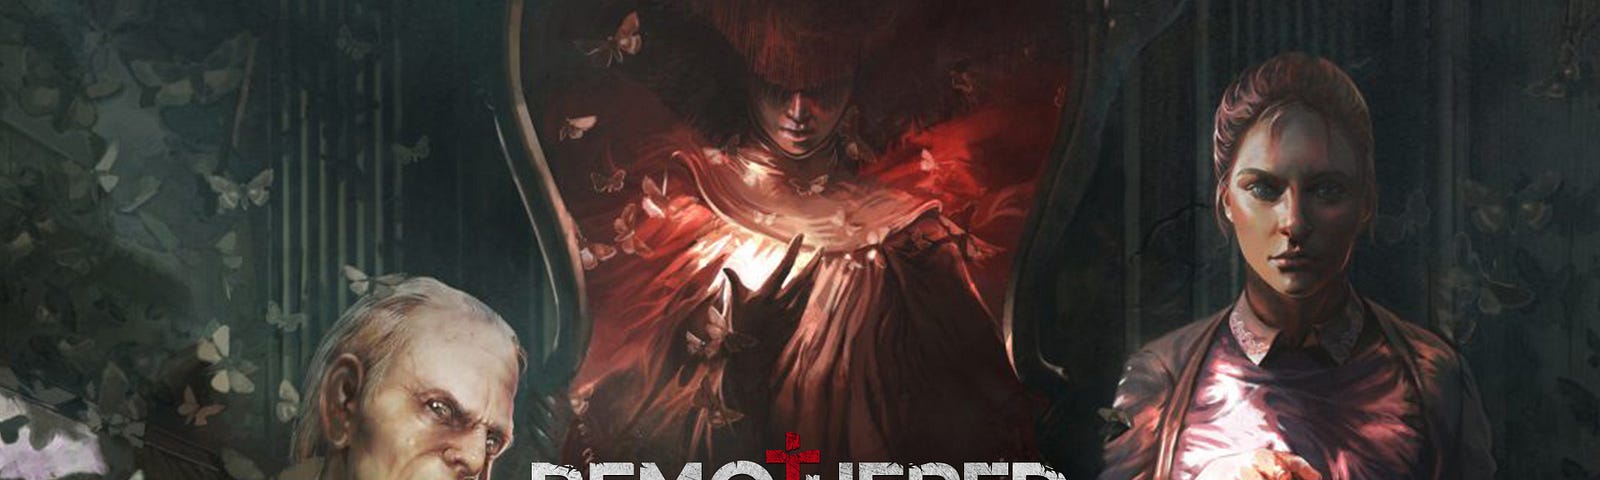 remothered tormented fathers nintendo switch review